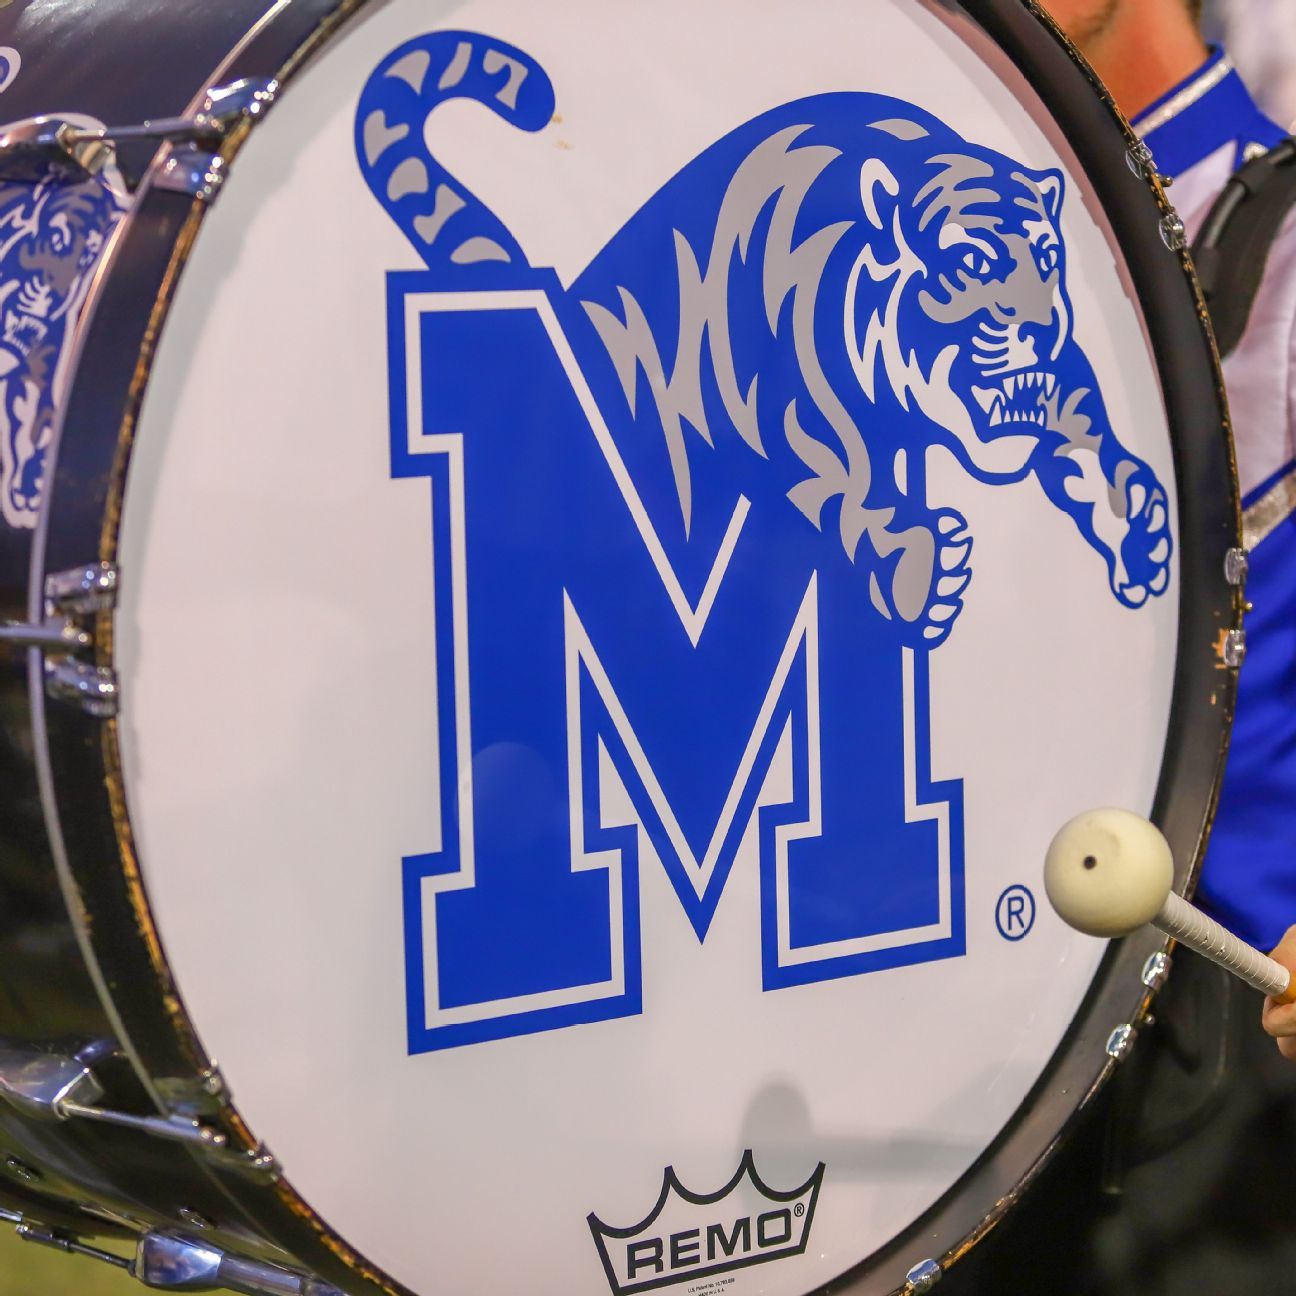 Ed Scott, a sports administrator from Virginia, hired as AD by Memphis